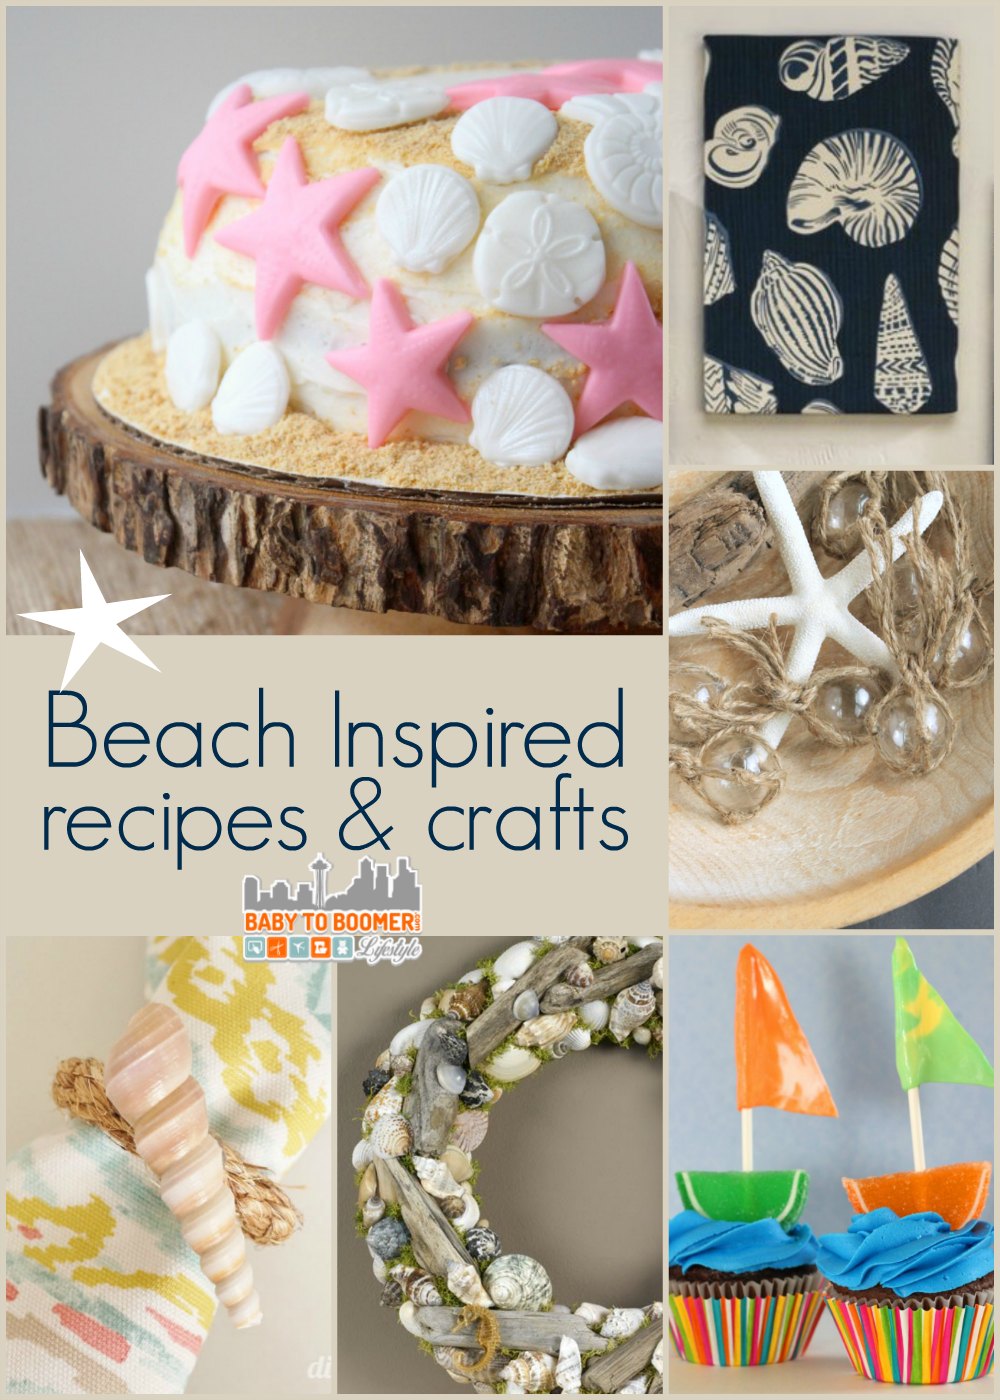 Beach Inspired Recipes and Crafts